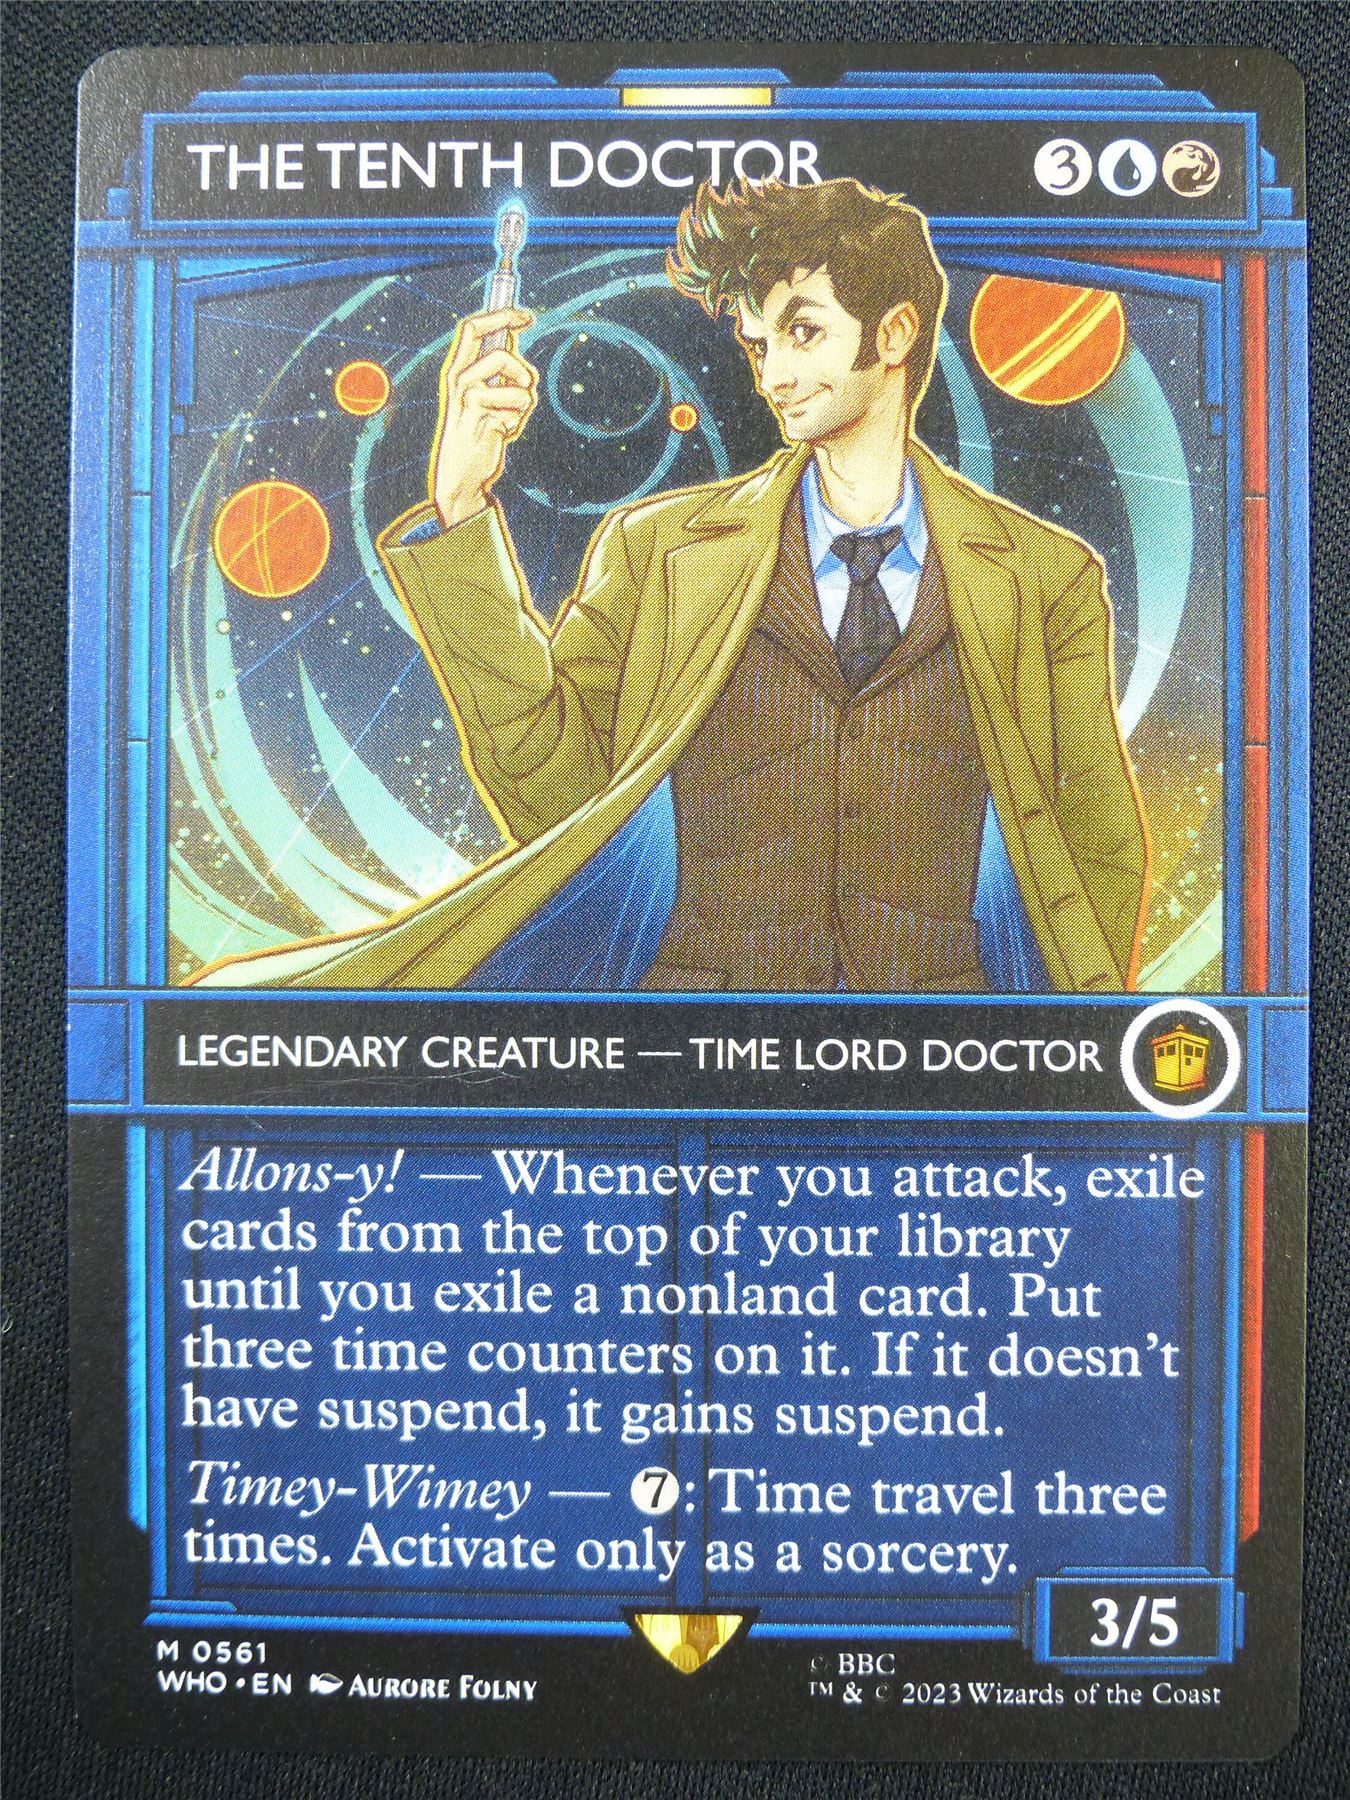 The Master, Multiplied (Showcase) Price from mtg Doctor Who